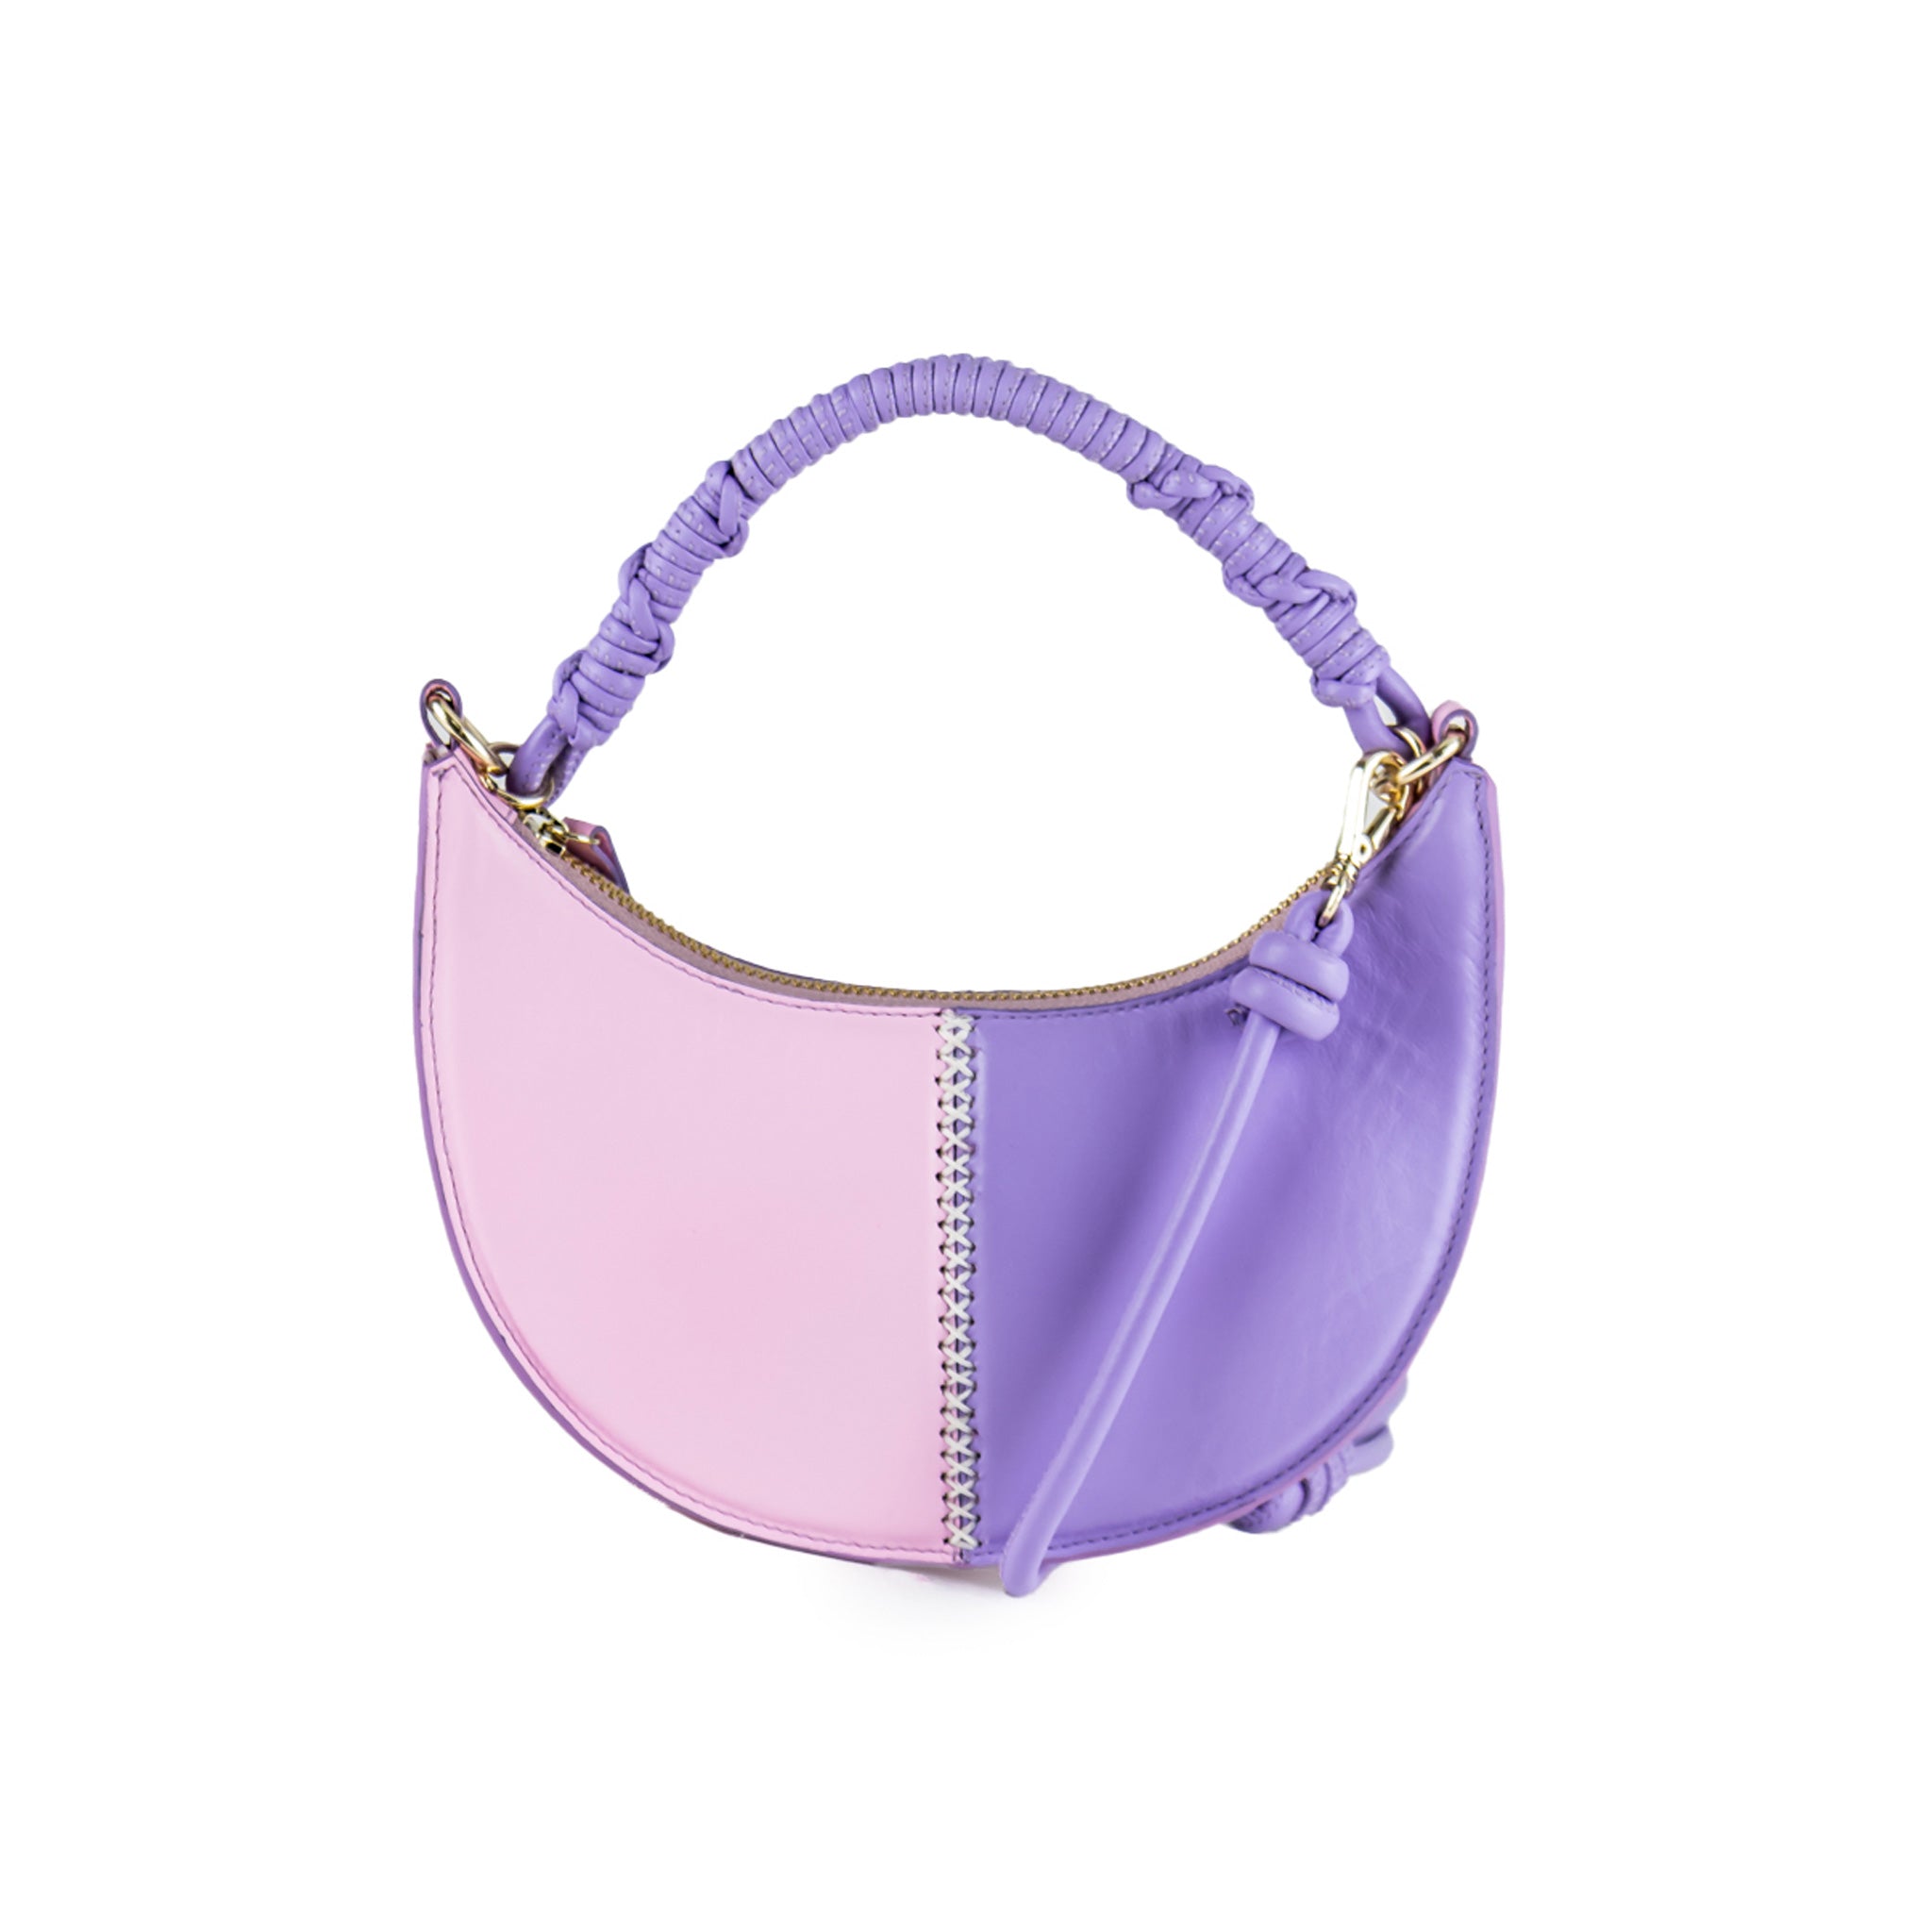 Crescent Moon Bag in Lilac